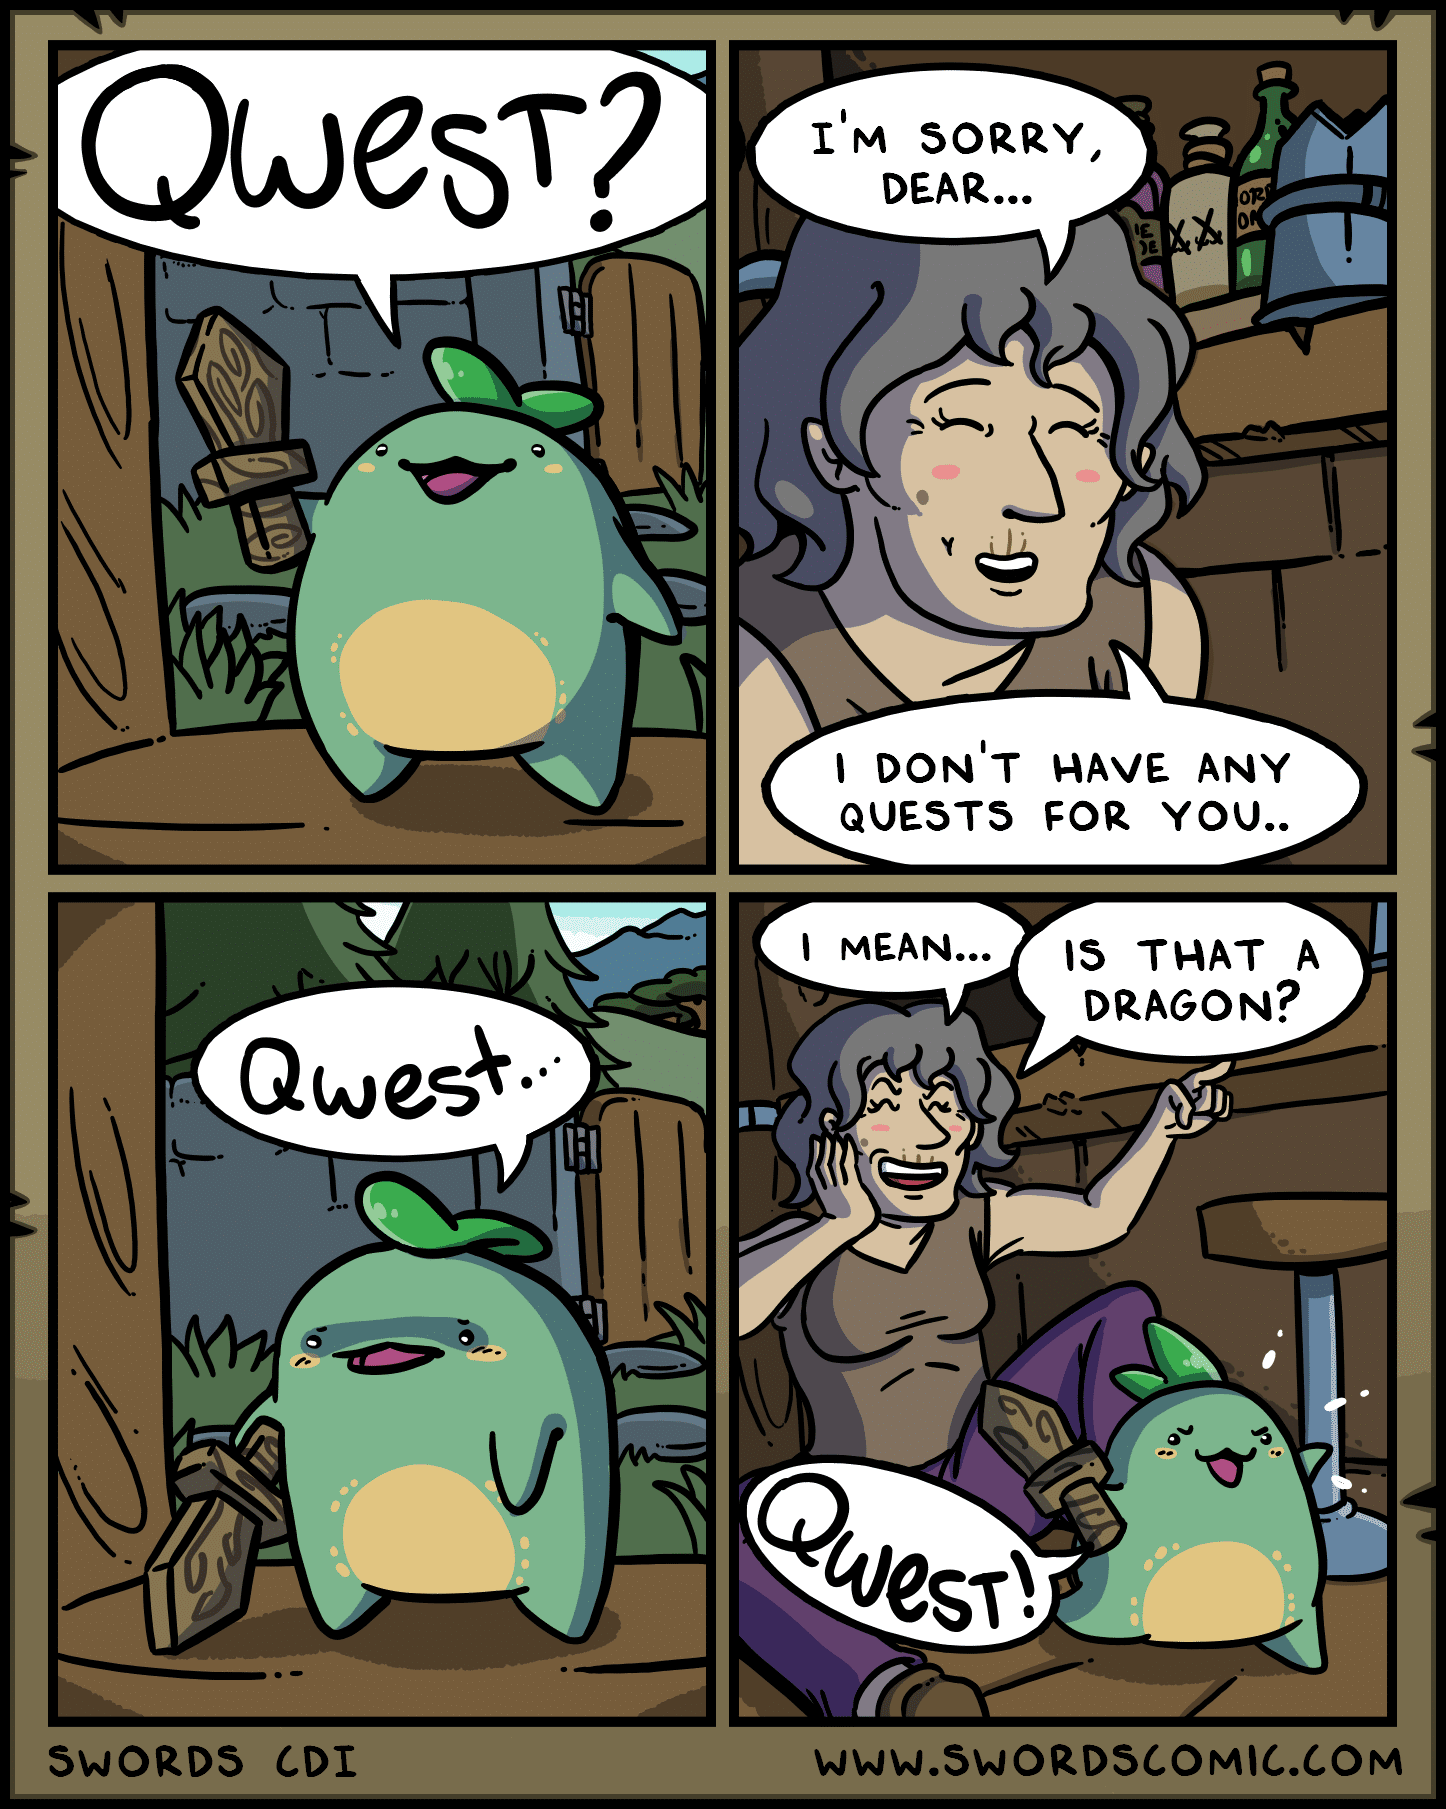 Comics, Quest, No, Catbug, Xenoblade Chronicles, WEST Comics Comics, Quest, No, Catbug, Xenoblade Chronicles, WEST text: Qwest? Qwes*• SWORDS CDI I'M SORRY, DEAR... I DON'T QUESTS I MEAN... HAVE ANY FOR YOU.. IS THAT A DRAGON? WWW.SWORDSCOMIC.COM 